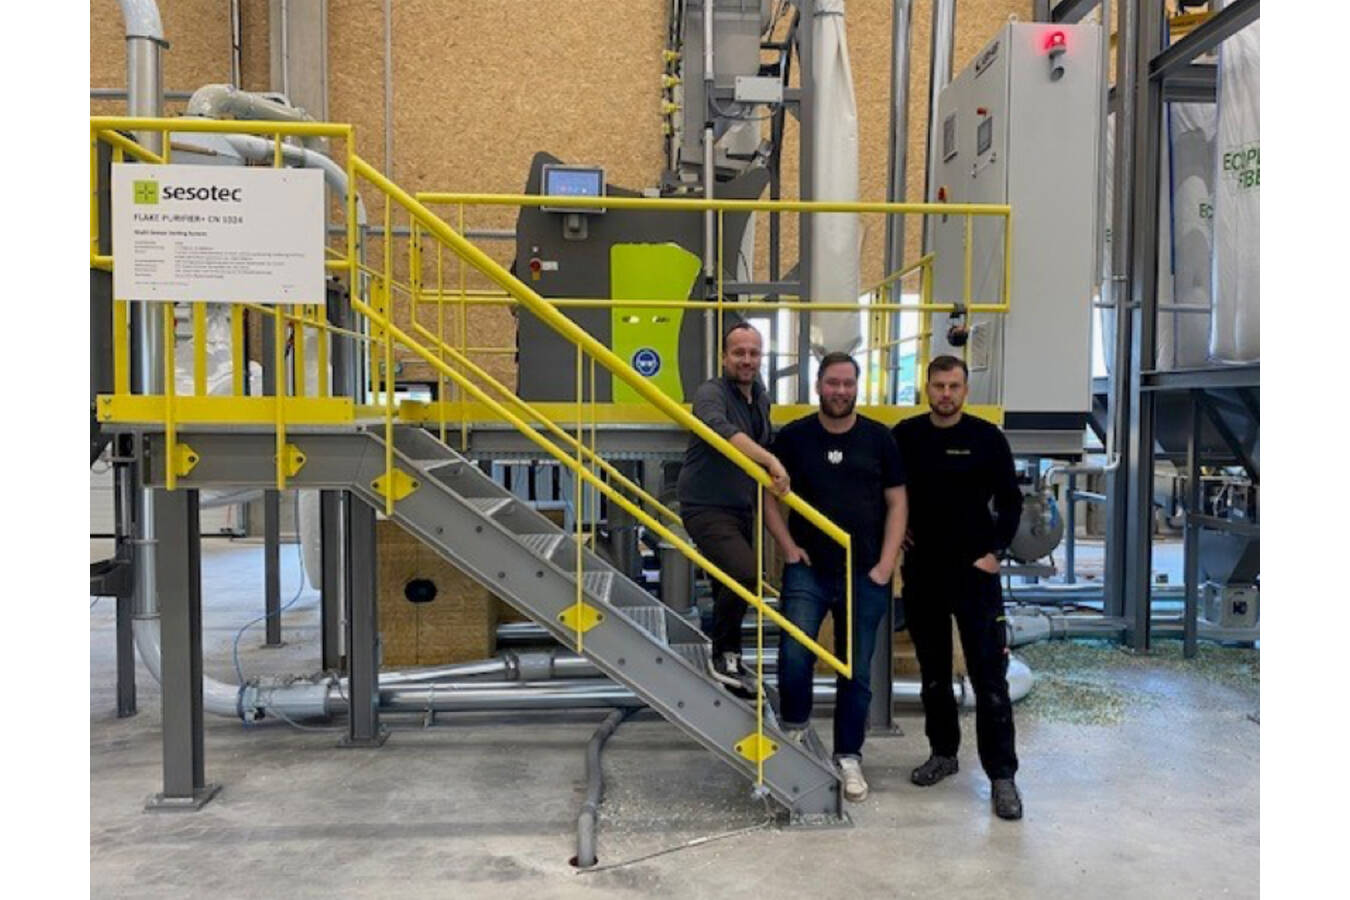 The two managing directors of Mission PET, Markus Huemer and Daniel Pichler (pictured left and centre), rely on the innovative sorting technology from Sesotec and the expertise of Dominik Ebner, Sesotec Regional Sales Manager (pictured right).